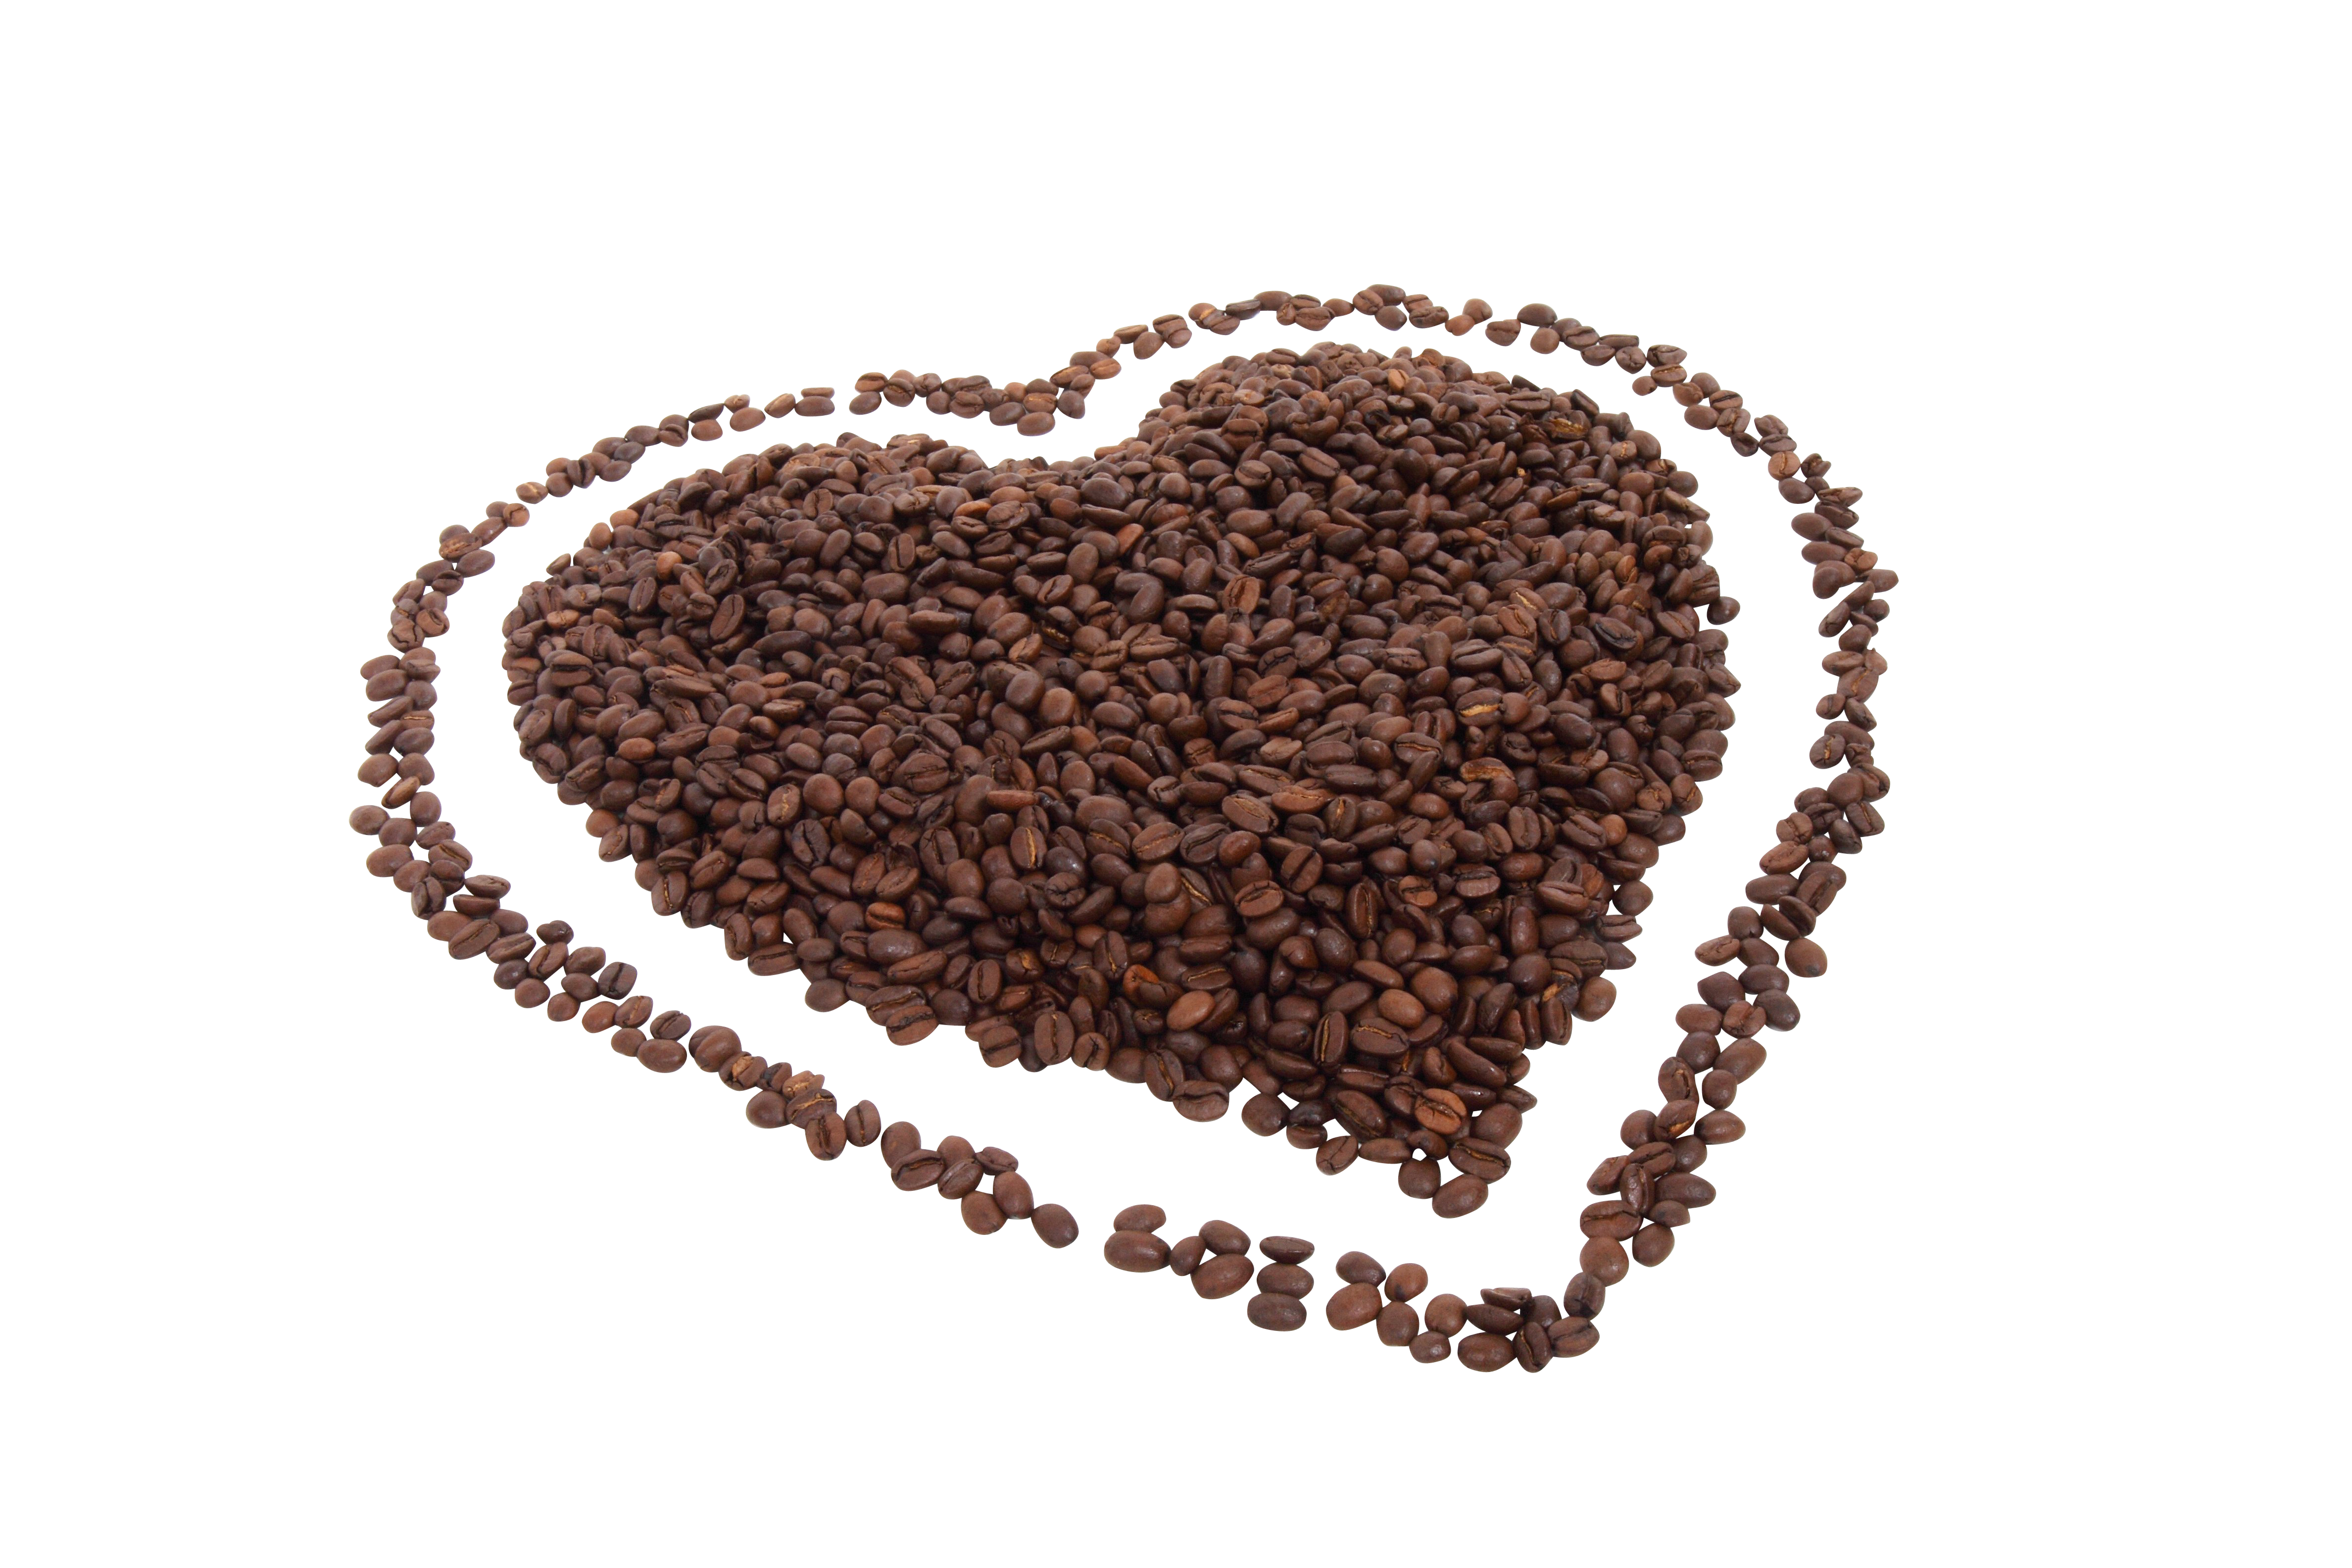 A Heart Made Of Coffee Beans